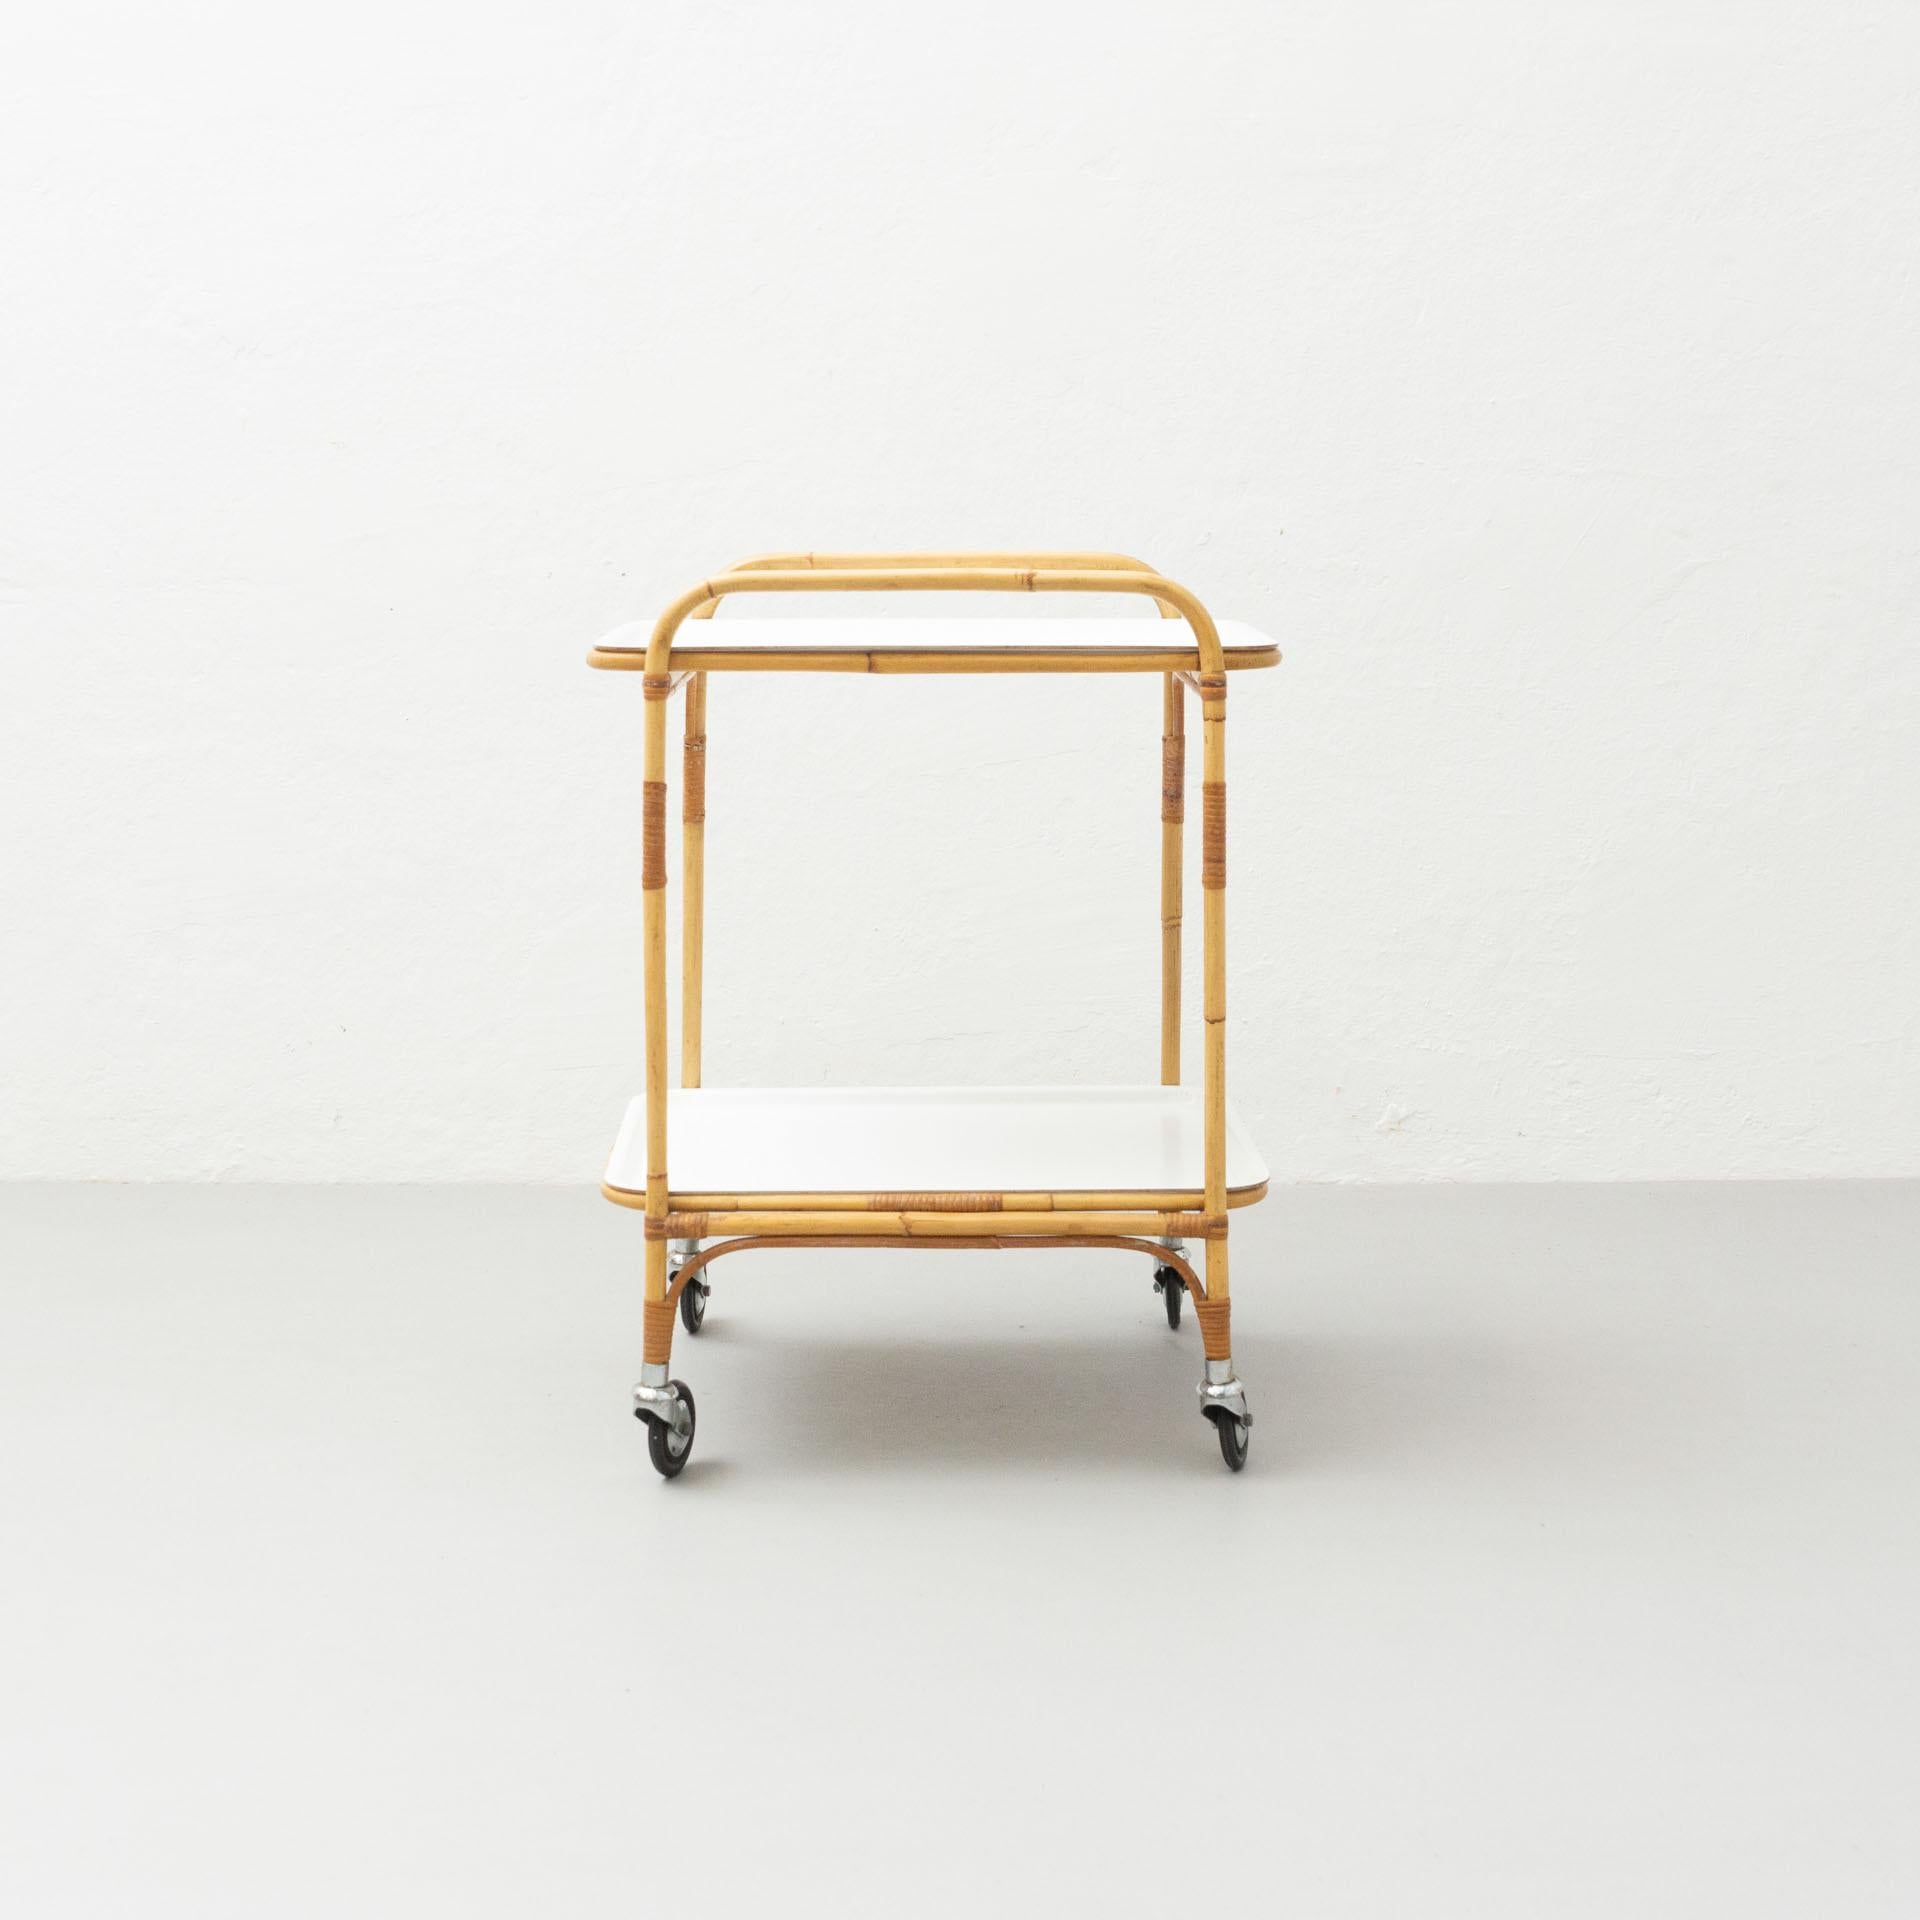 Trolley designed by MMiguel Milà, circa 1960.

In original condition, with minor wear consistent with age and use, preserving a beautiful patina.

Materials:
Bamboo
Plastic

Dimensions:
D: 56 cm
W: 46 cm
H:74 cm

About the